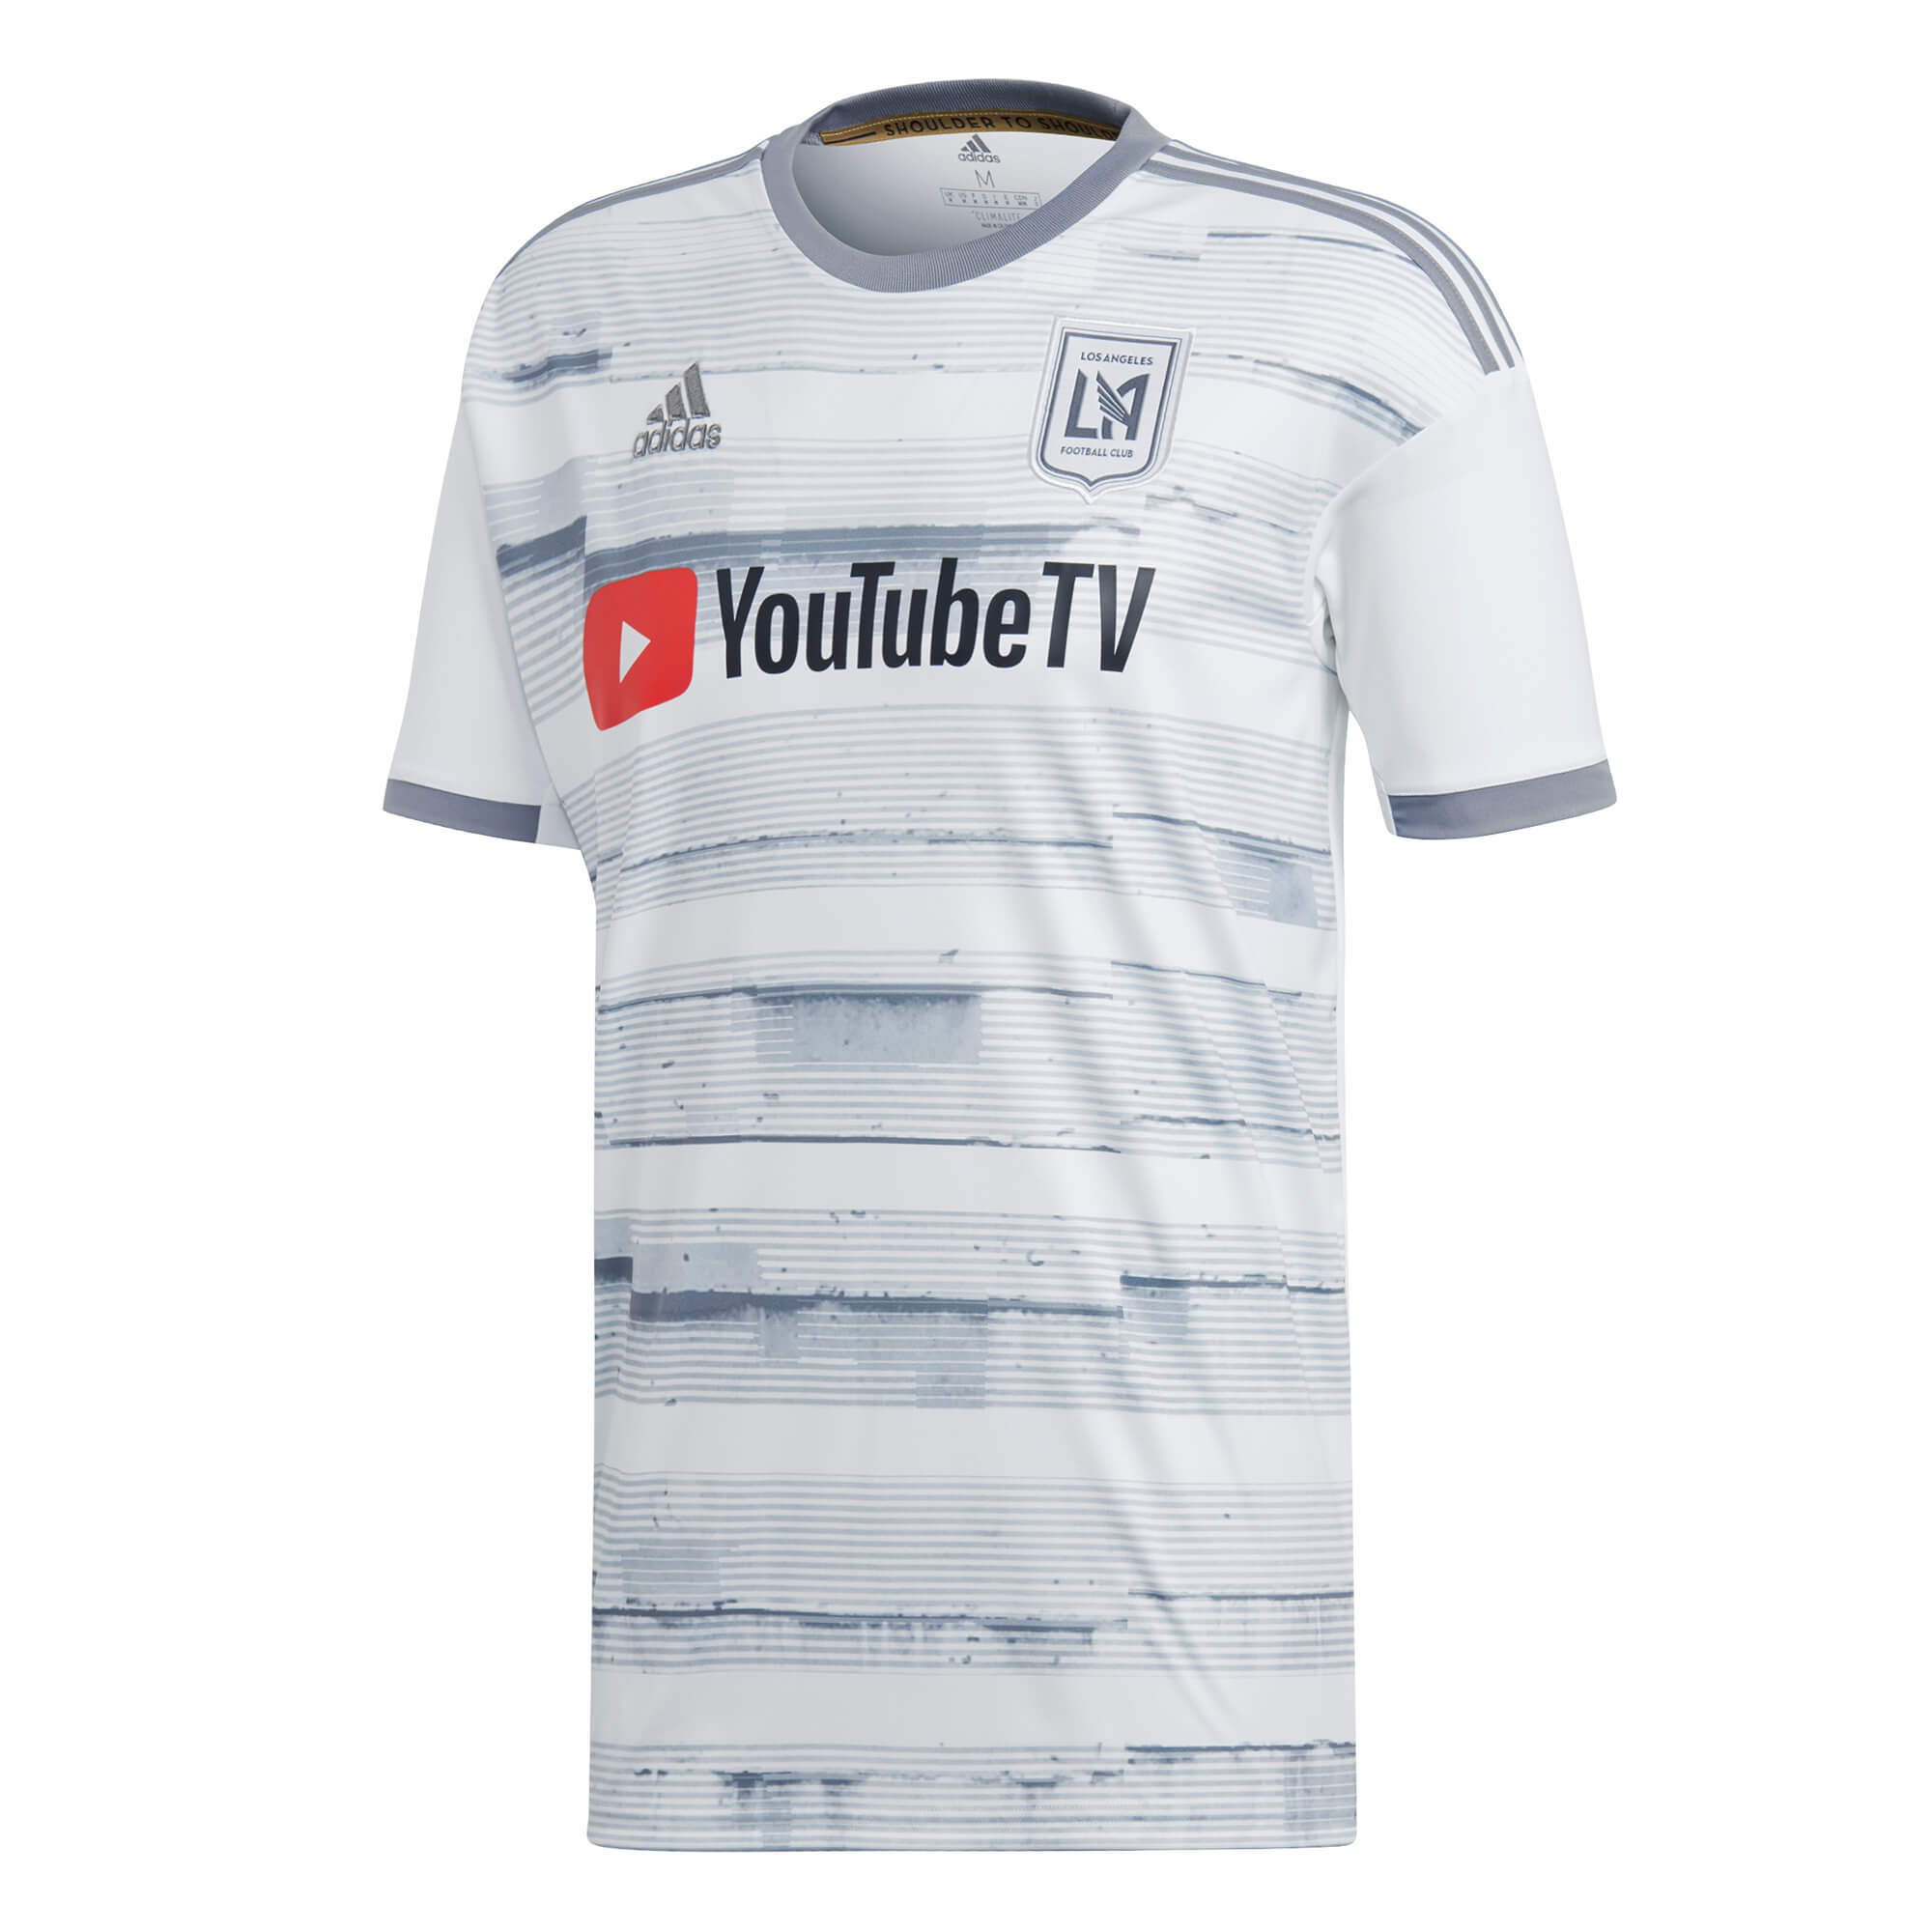 ADIDAS LOS ANGELES FC MAILLOT EXTERIEUR 2019/2020